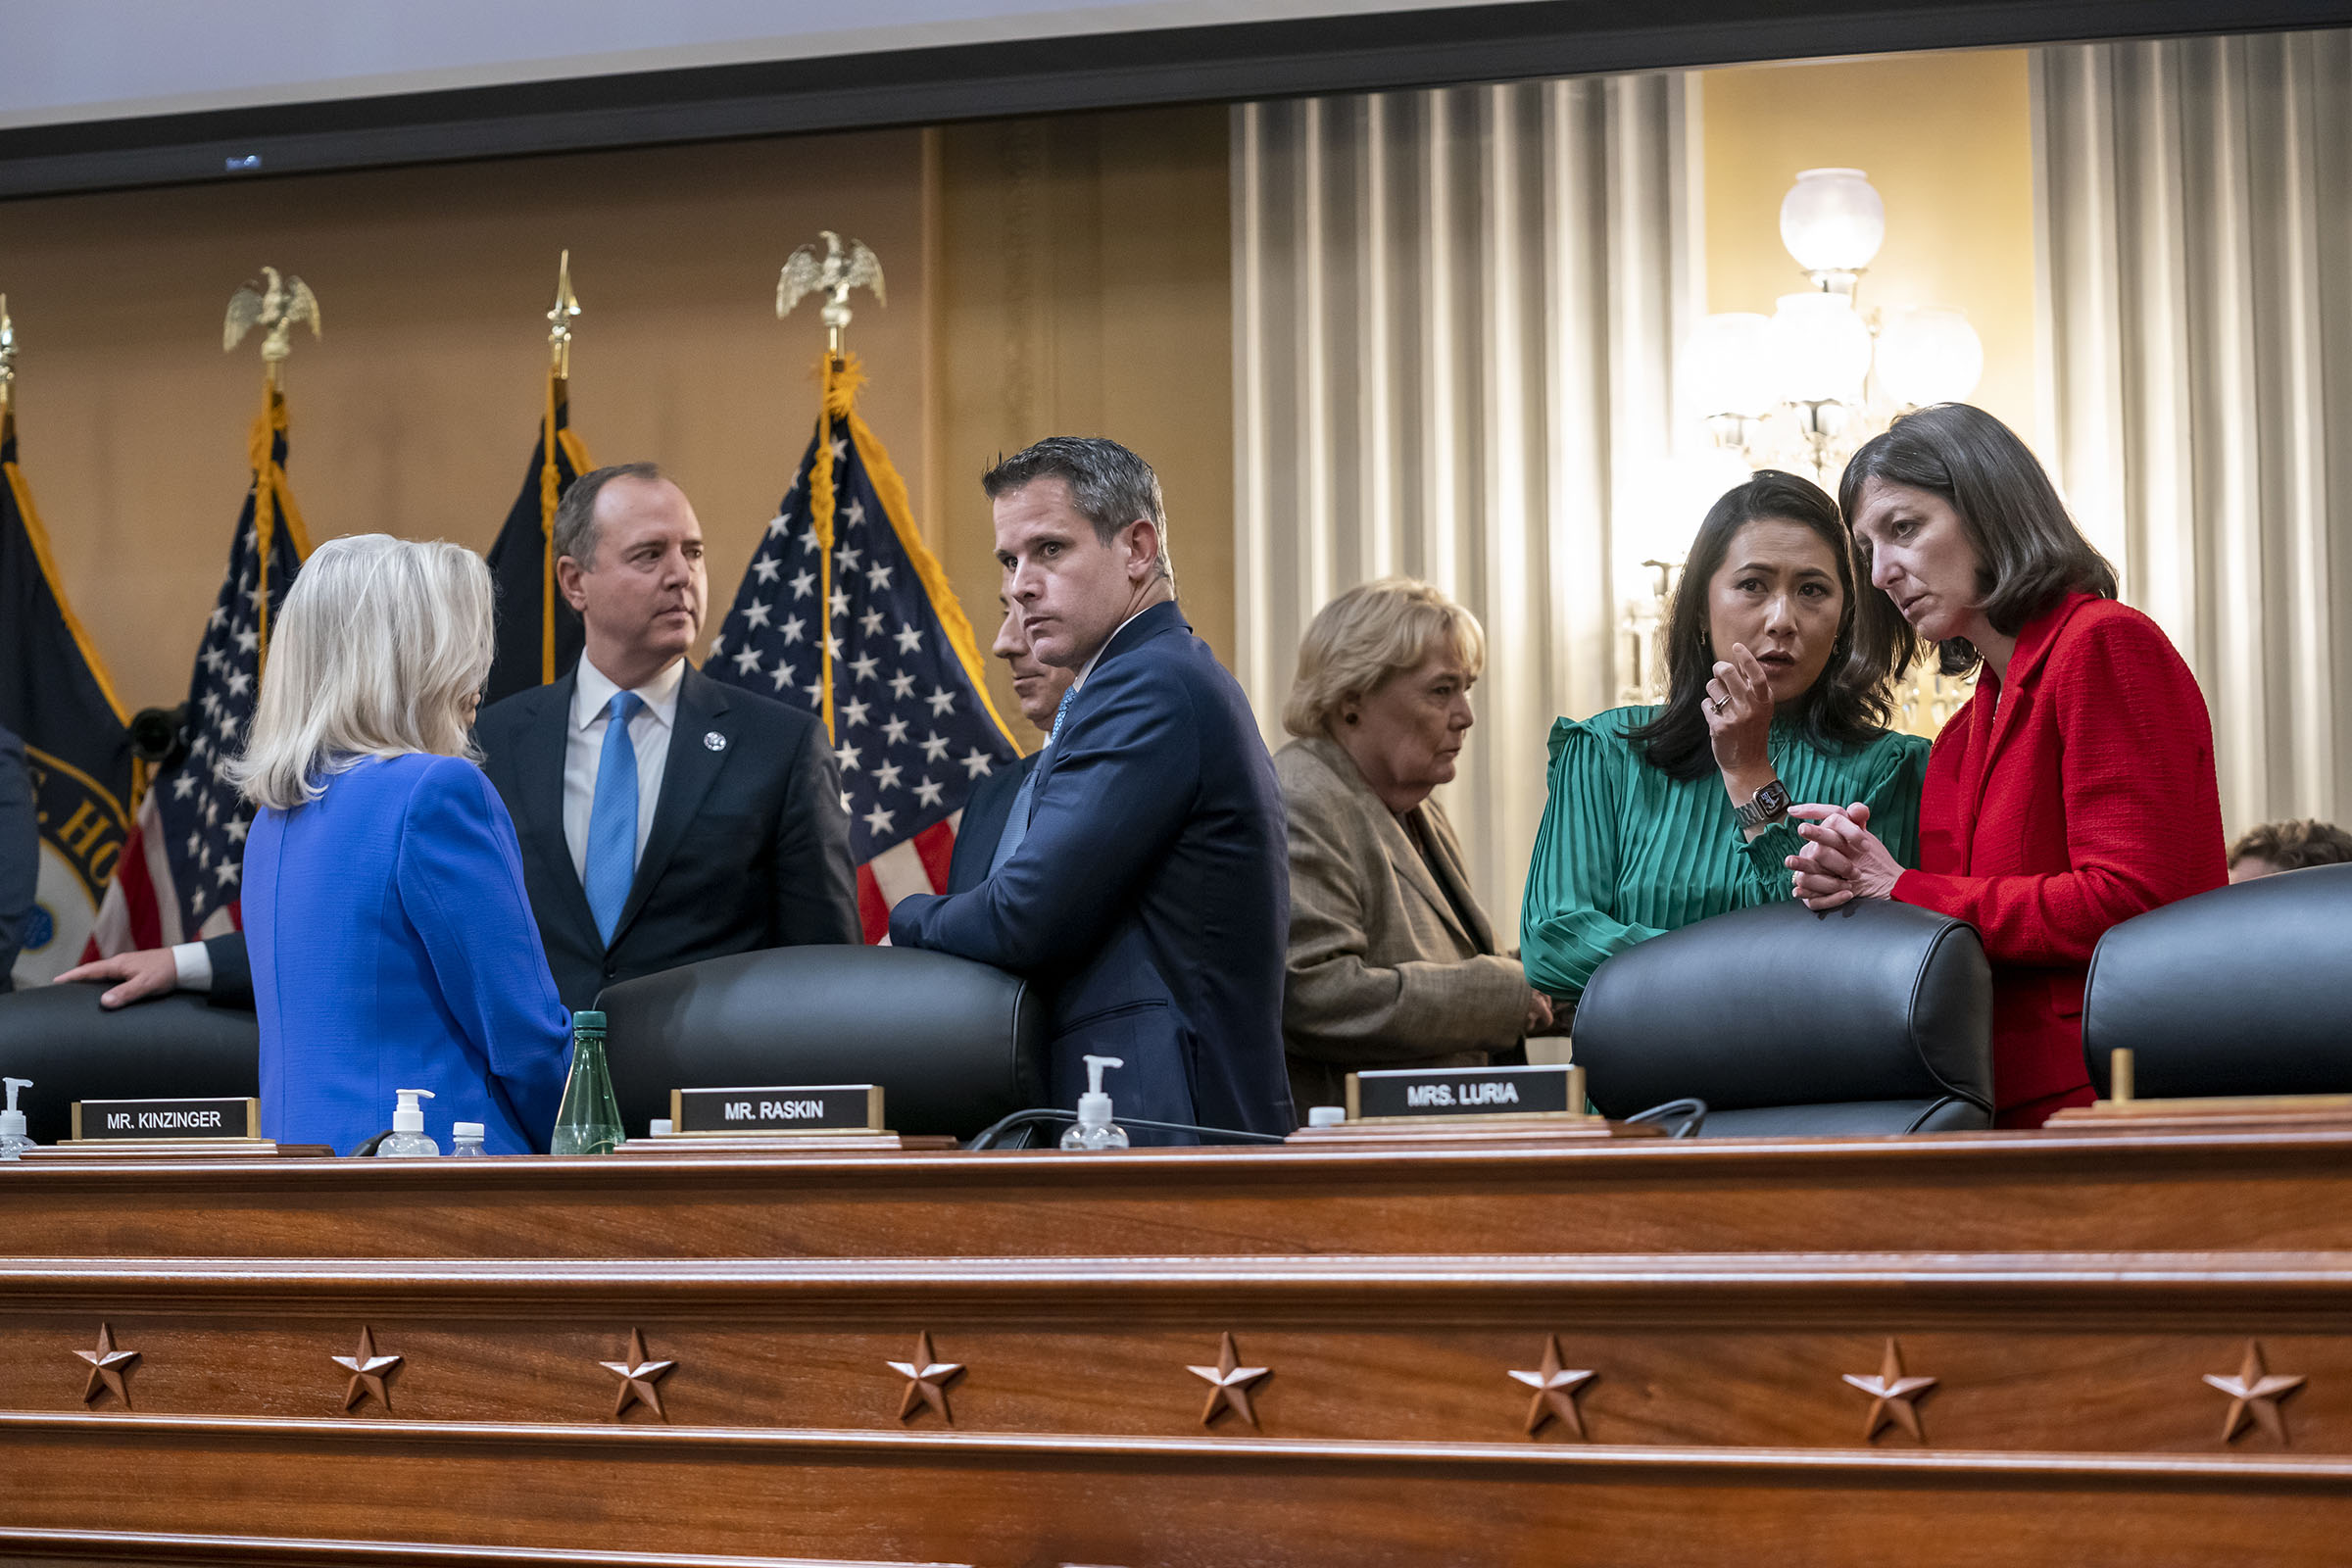 From left Vice Chair Liz Cheney, R-Wyo., Rep. Adam Schiff, D-Calif., Rep. Jamie Raskin, D-Md., partially obscured, Rep. Adam Kinzinger, R-Ill., Rep. Zoe Lofgren, D-Calif., Rep. Stephanie Murphy, D-Fla., and Rep. Elaine Luria, D-Va., during a break at a public hearing to reveal the findings of a year-long investigation on the Jan. 6 attack on the U.S. Capitol, June 9, 2022. (J. Scott Applewhite—AP)